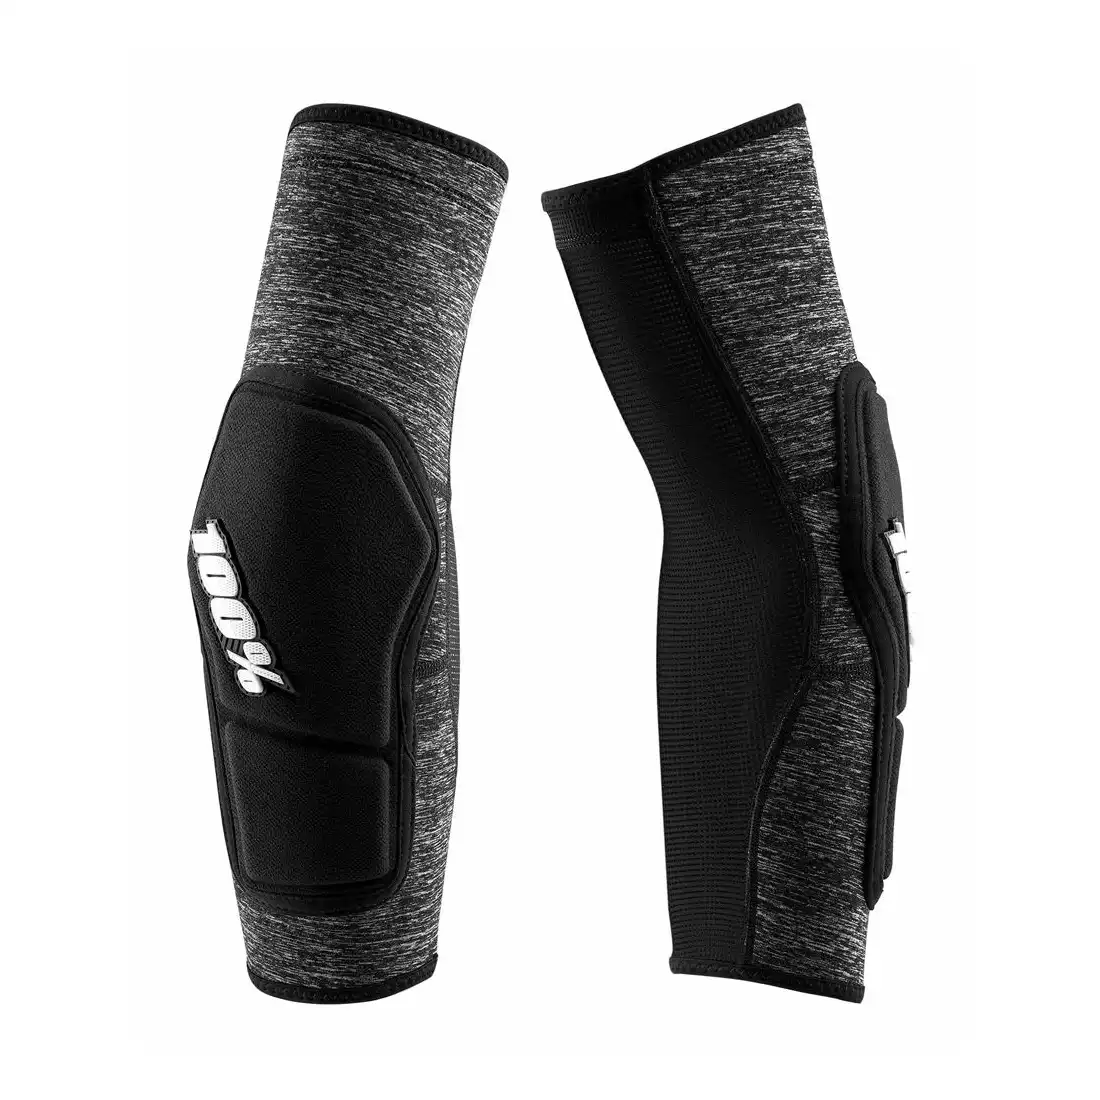 100% RIDECAMP Elbow Guard Elbow pads, black and gray